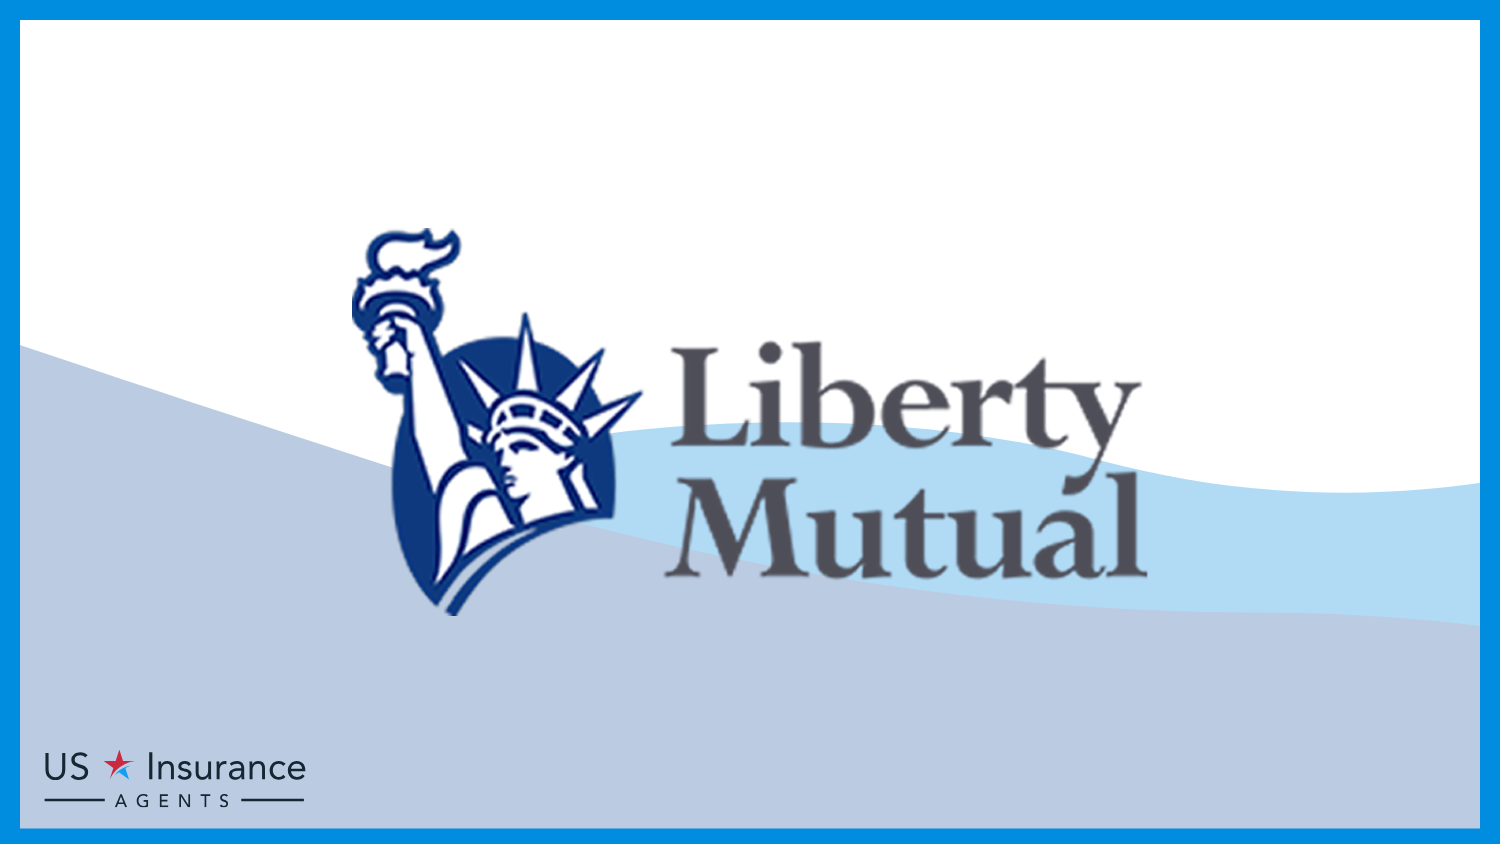 Liberty Mutual: Best Car Insurance for Healthcare Professionals